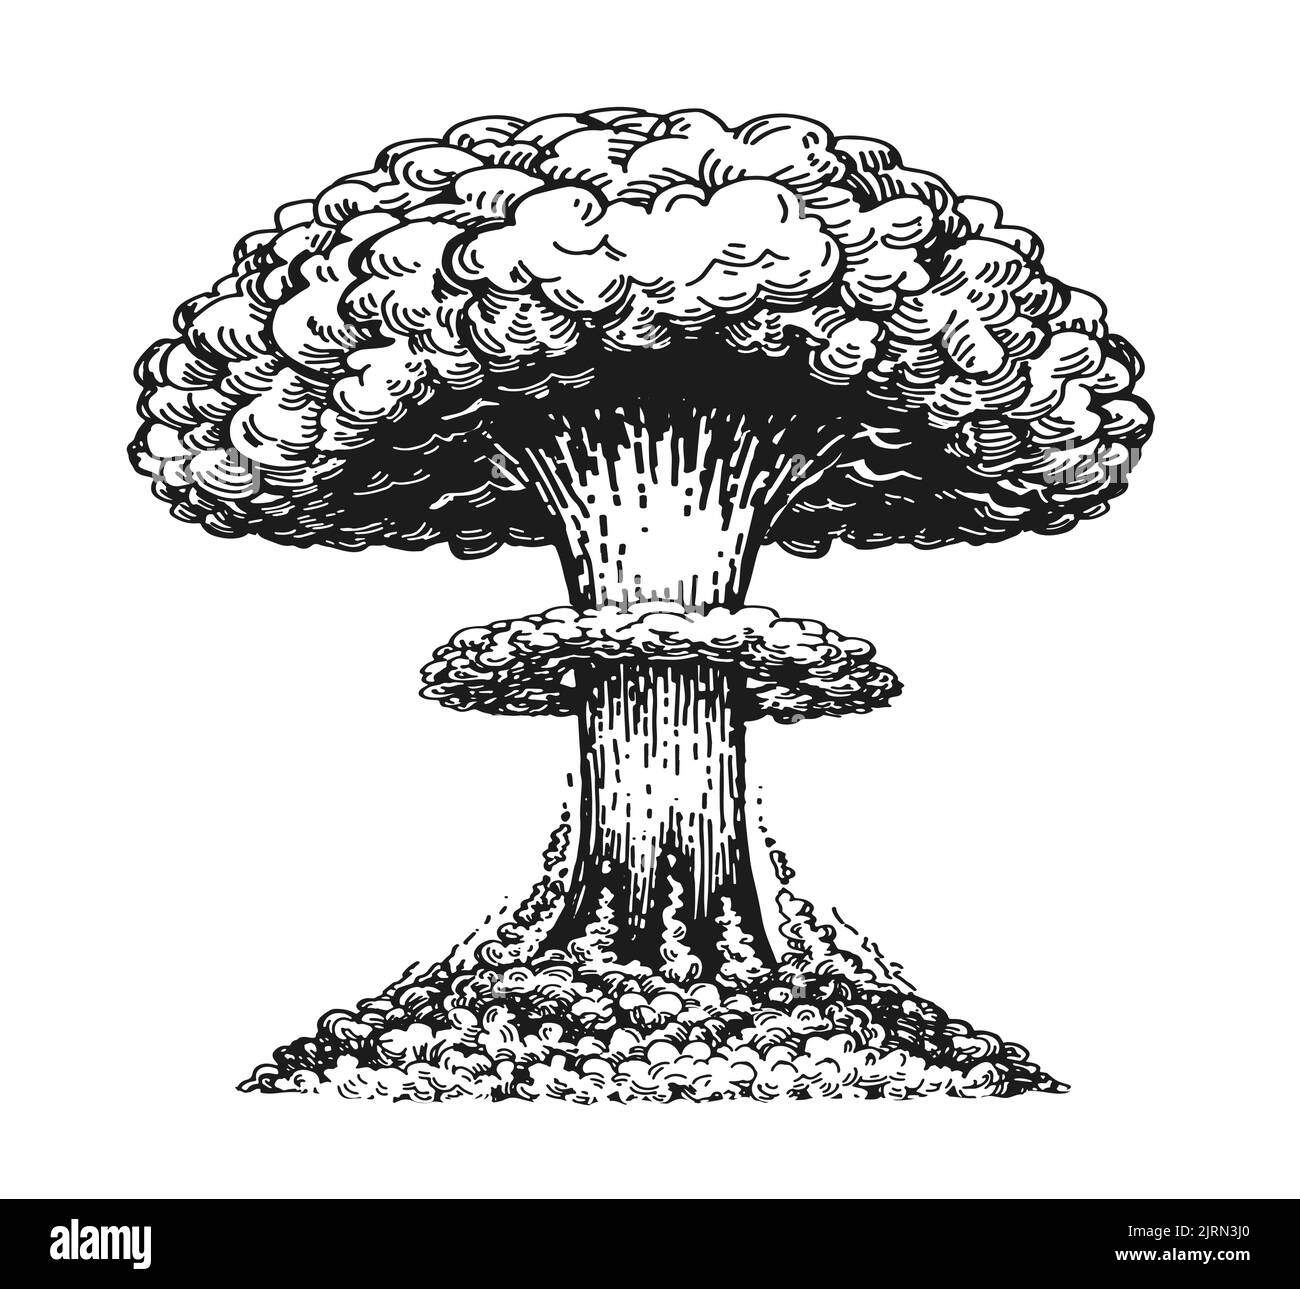 Nuclear explosion. Atomic bomb, mushroom cloud sketch. Radiation and destruction. Weapon vector illustration isolated Stock Vector